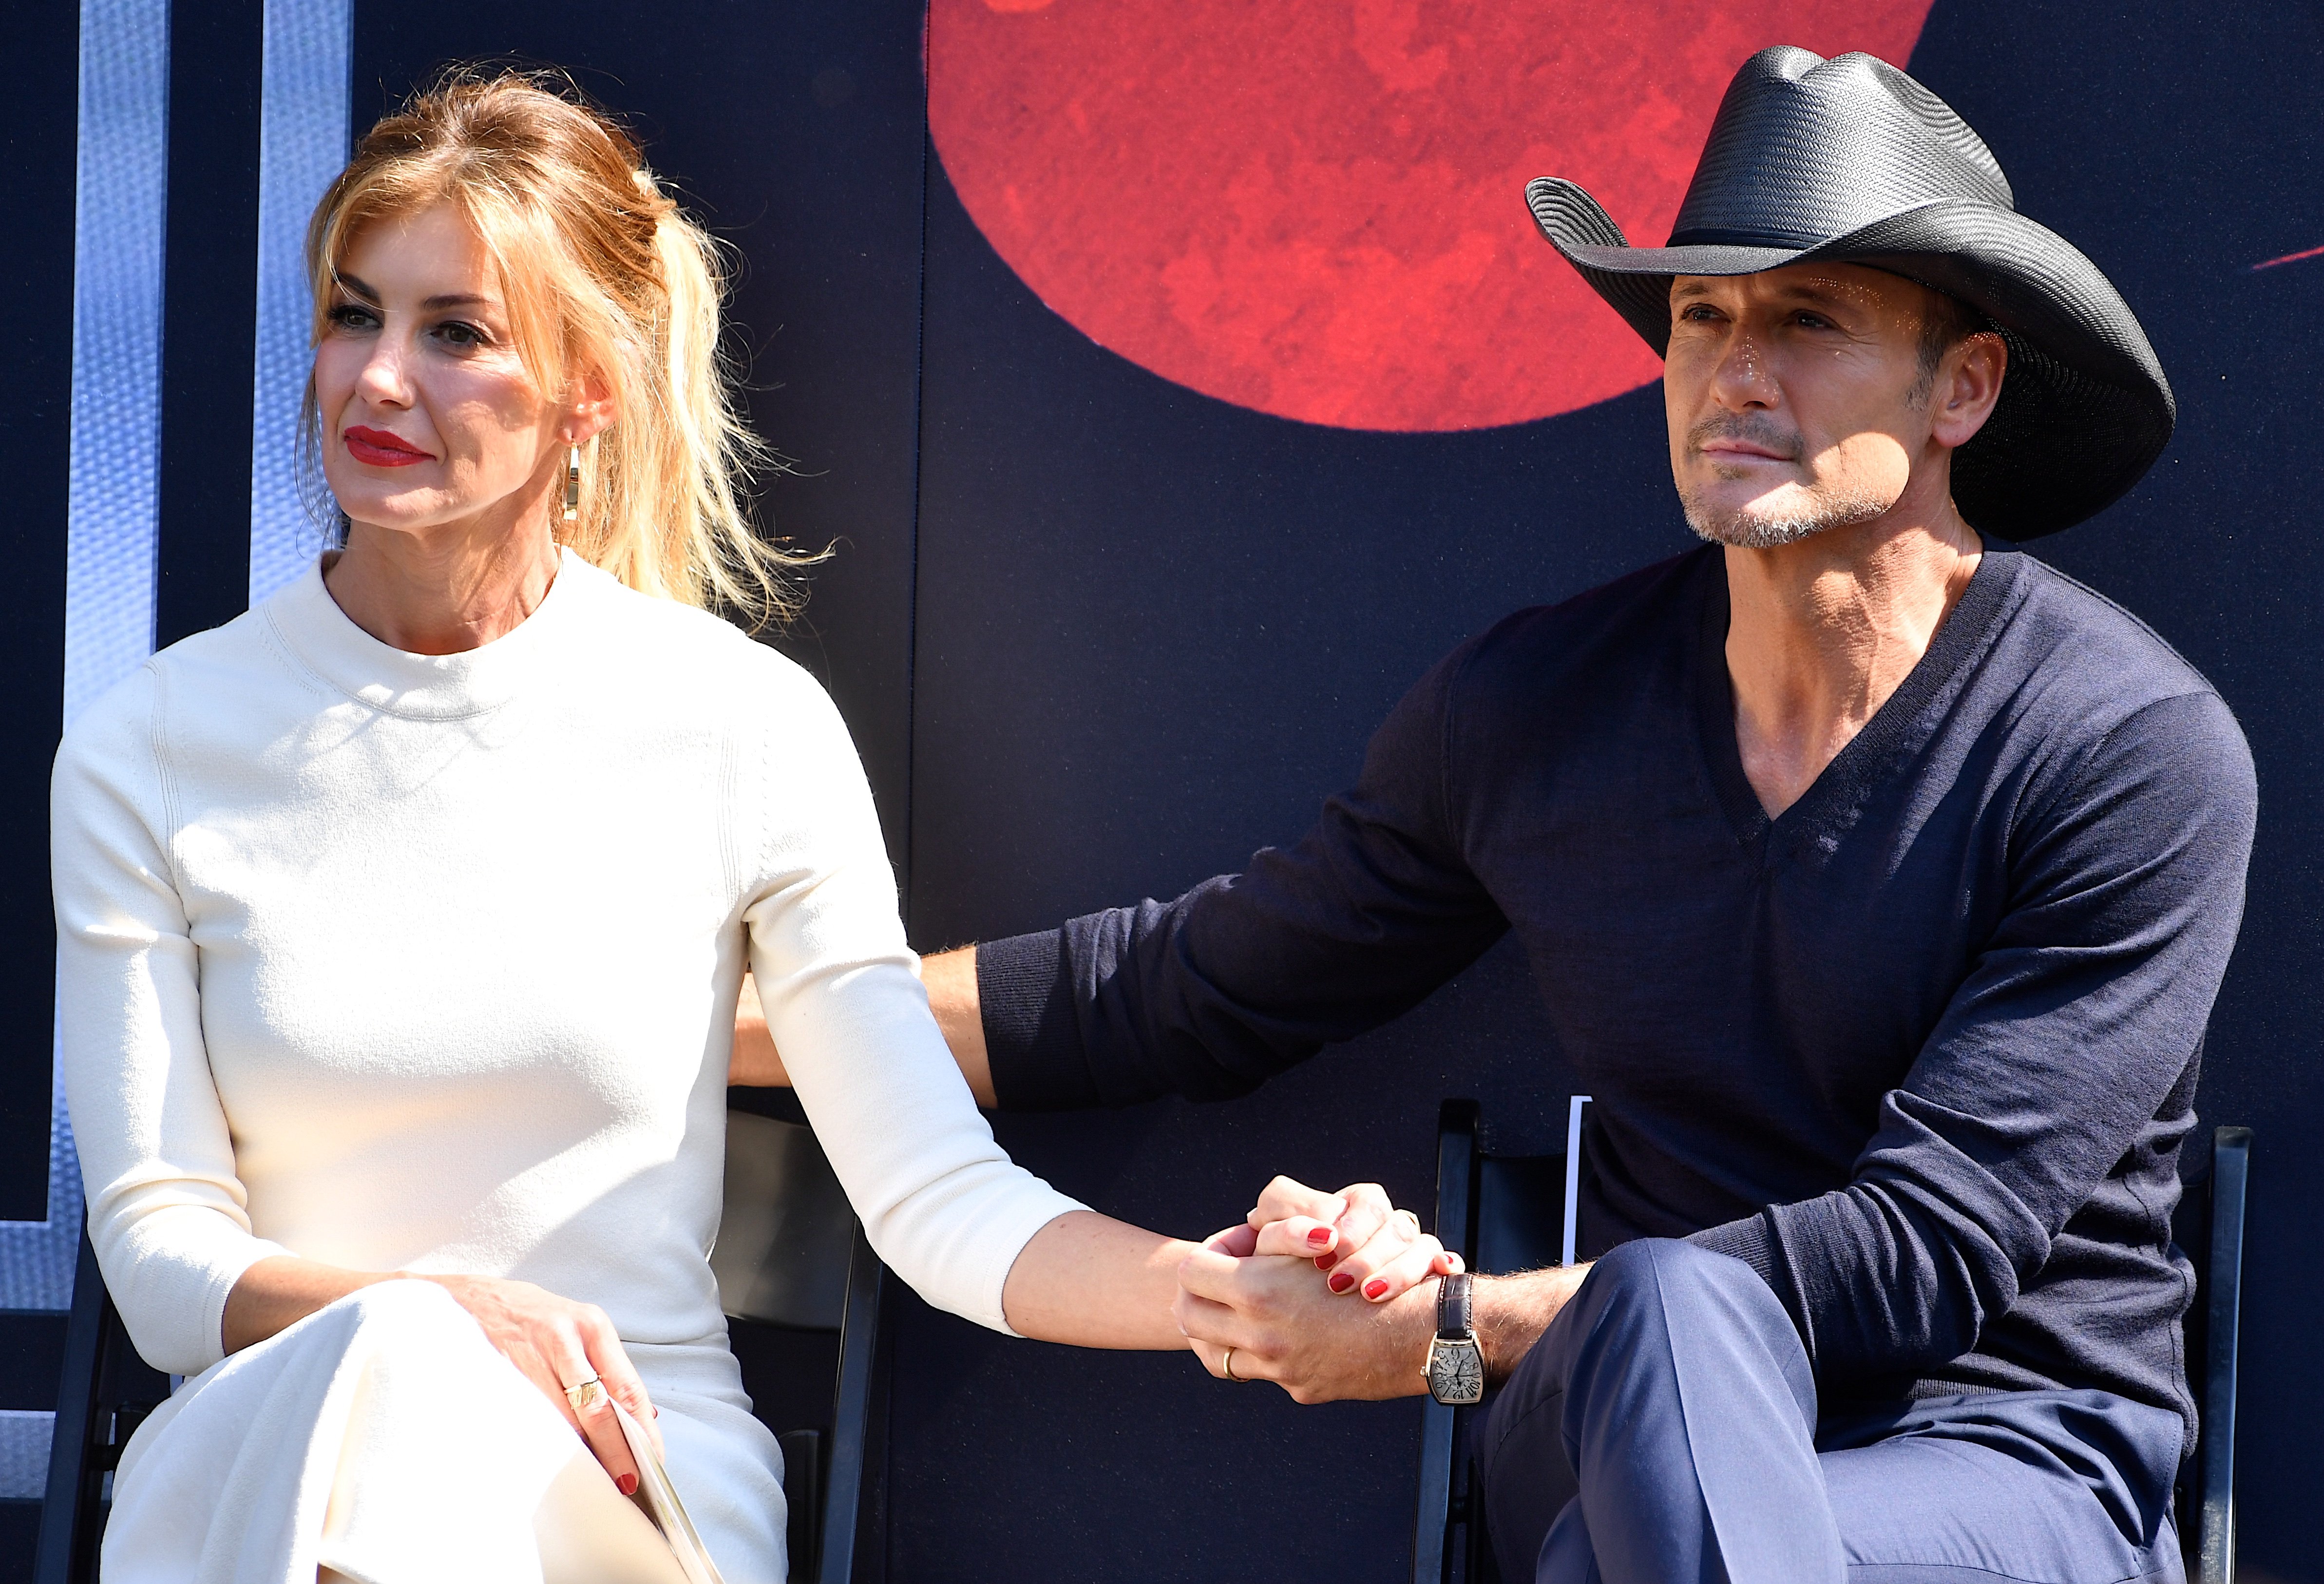 Artists Faith Hill and Tim McGraw attend Walk of Fame Ceremony at Nashville Music City Walk of Fame where they recieve stars on October 5, 2016 in Nashville, Tennessee. | Source: Getty Images